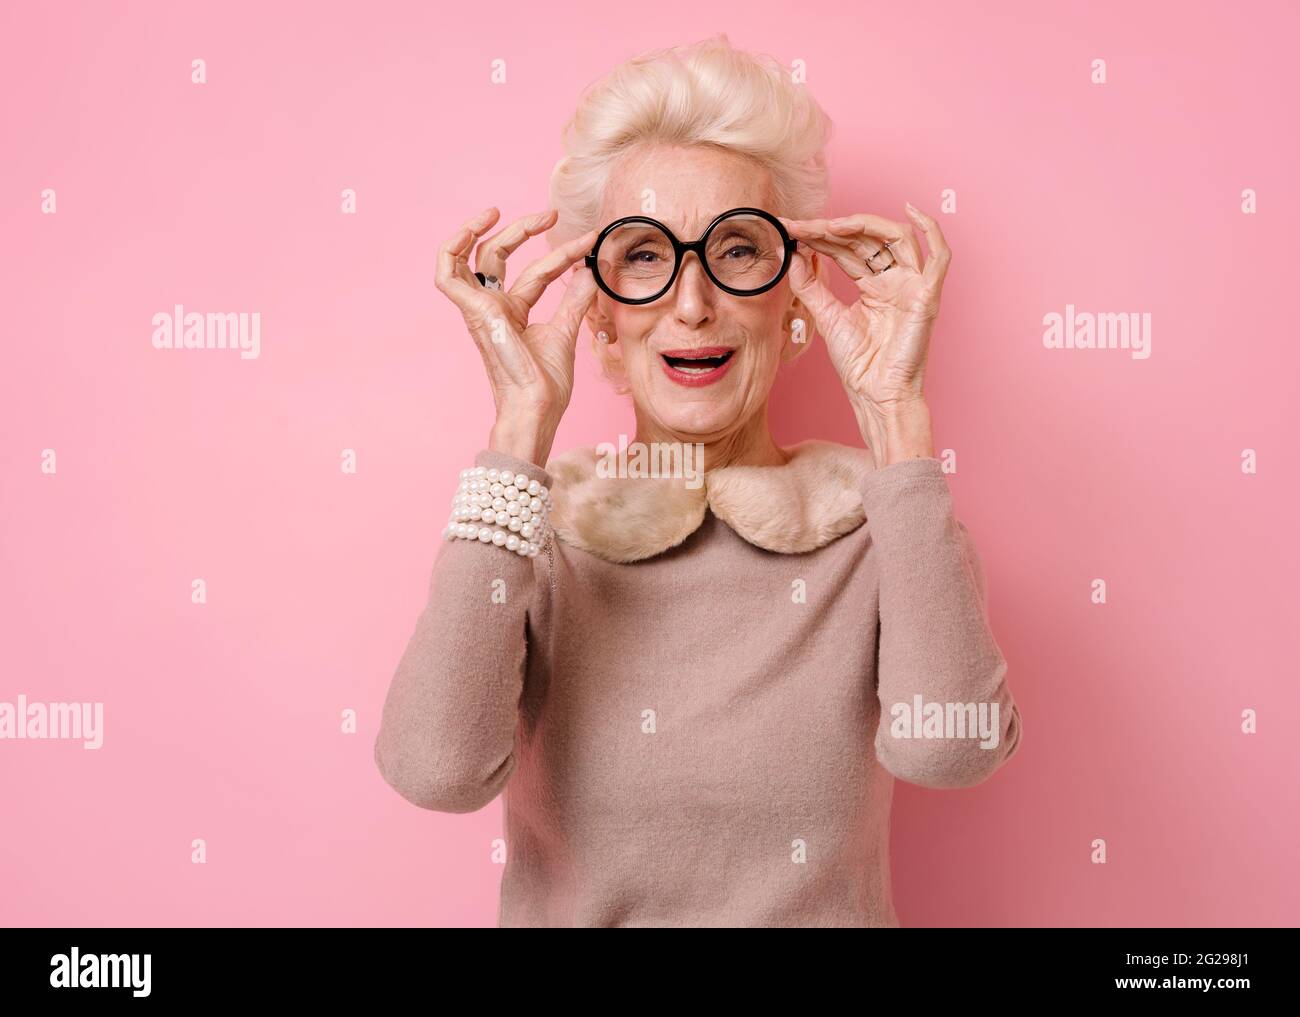 Overjoyed grandmother laughs at something funny. Photo of kind elderly woman in eyeglasses looking at camera on pink background. Stock Photo